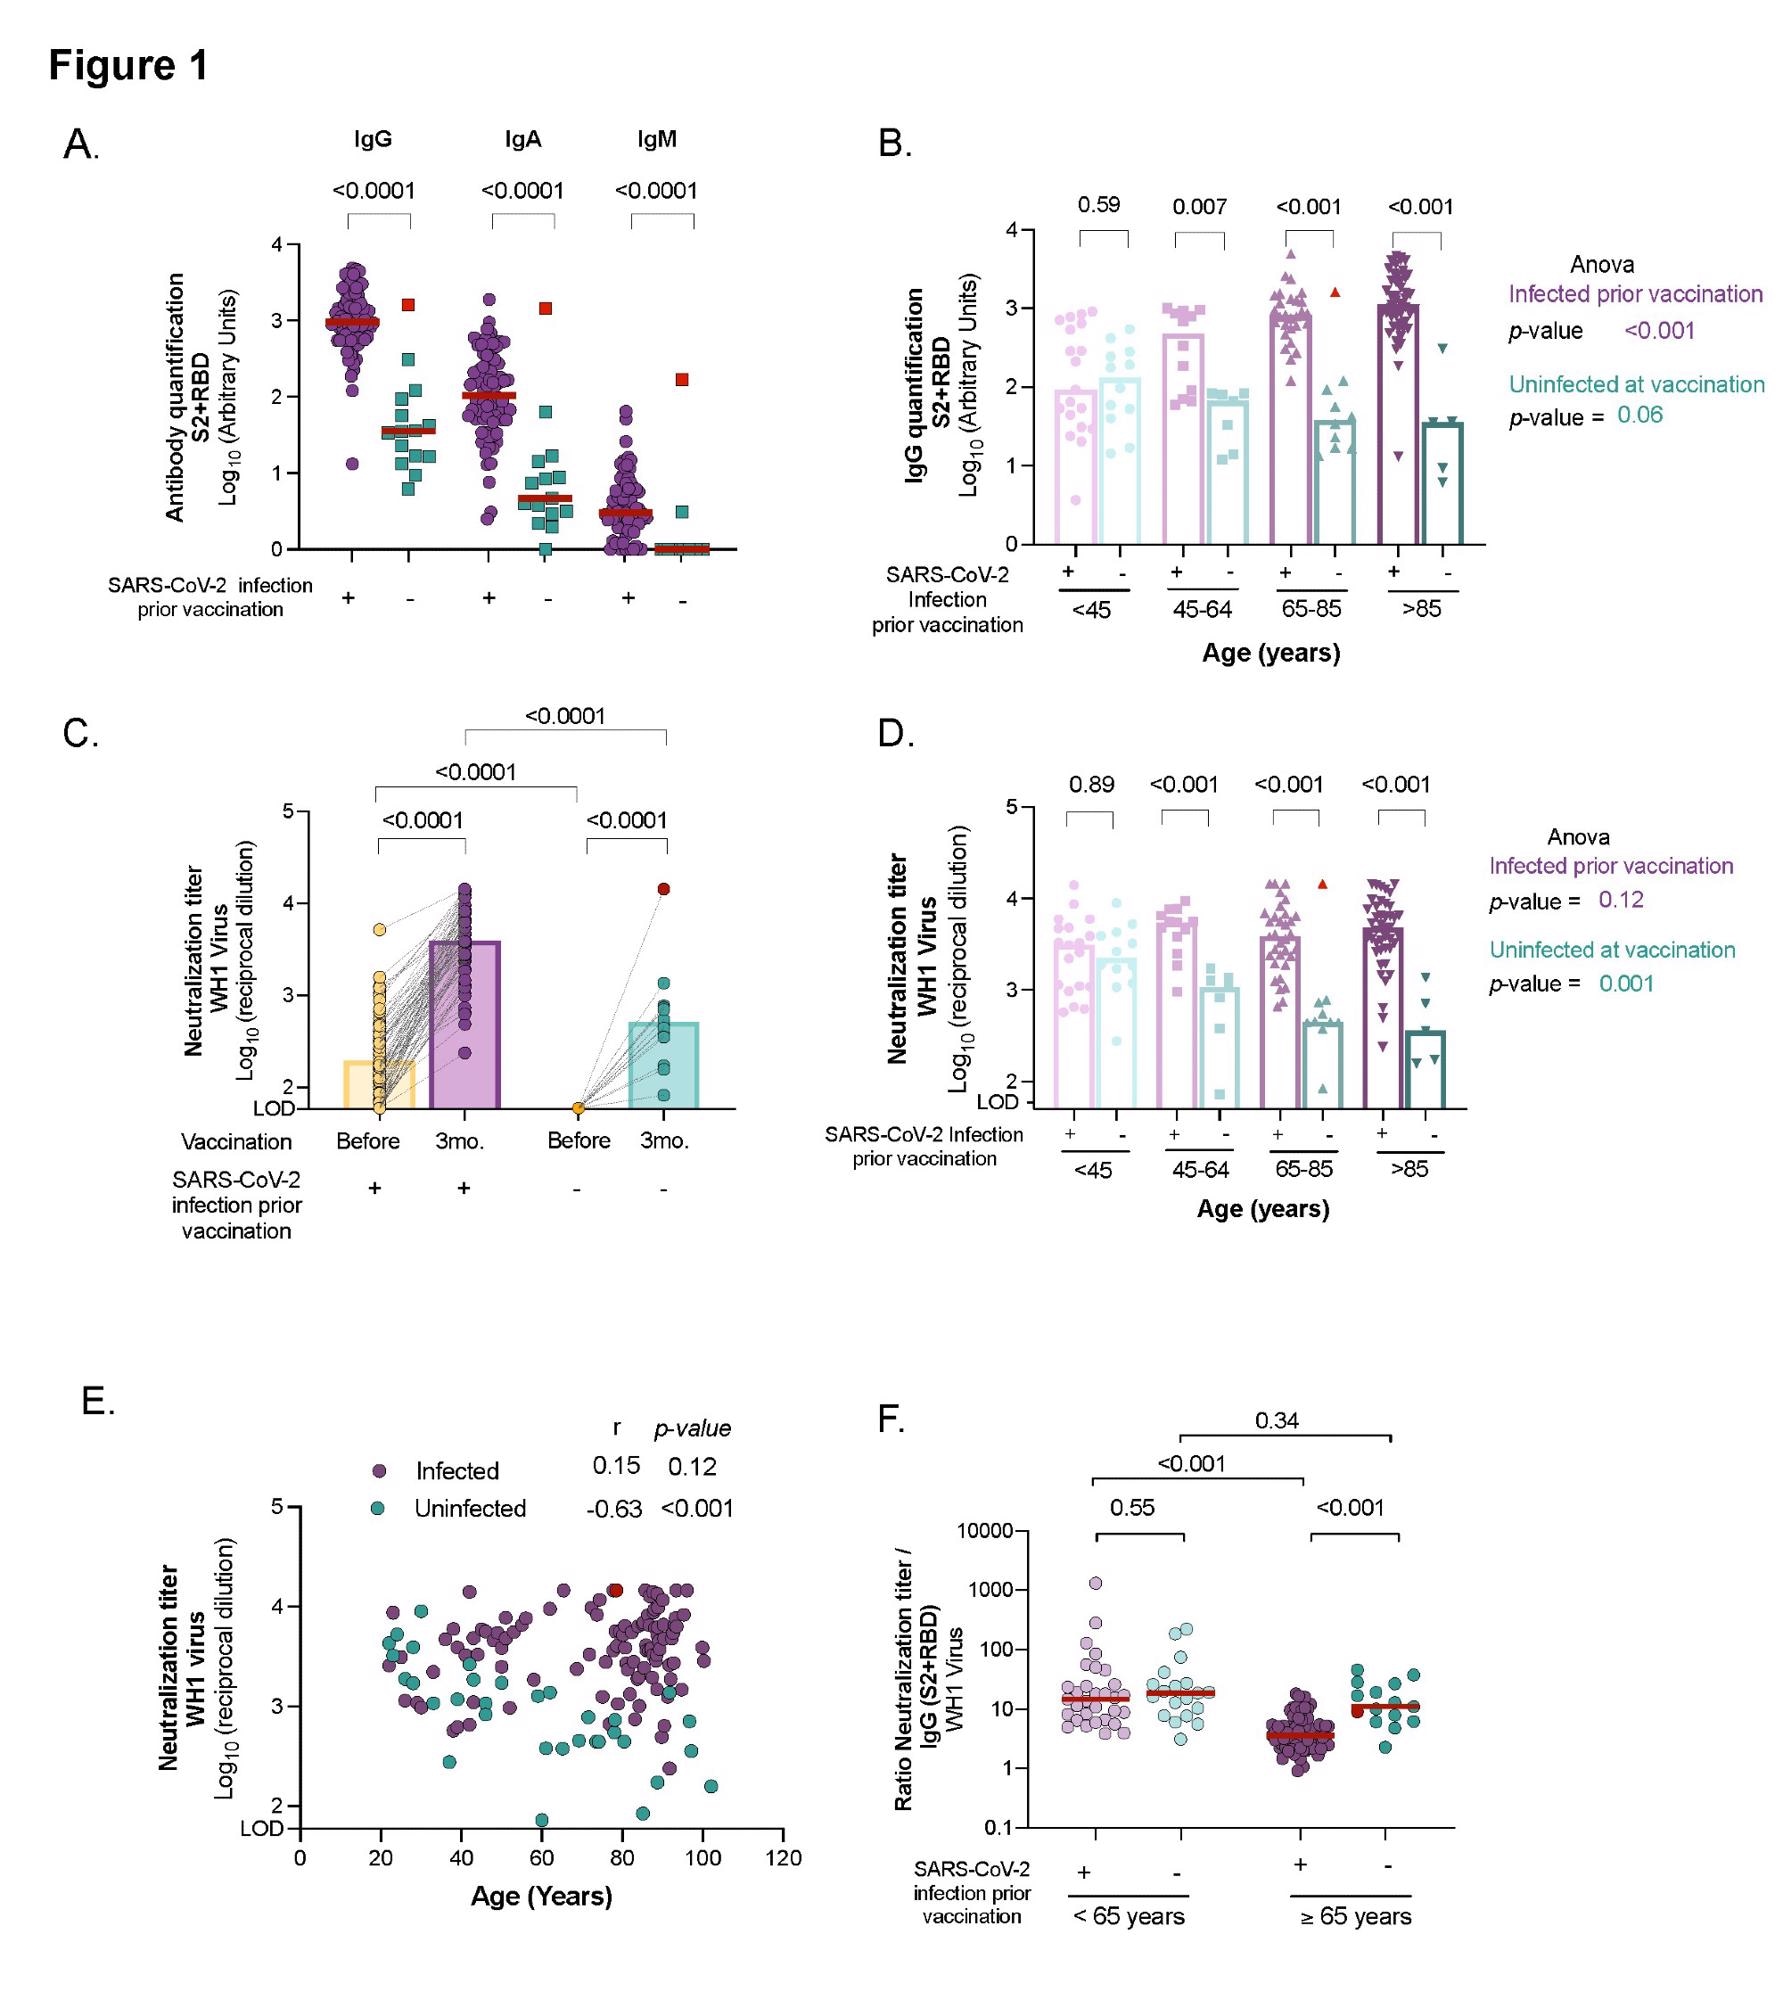 Comparison of humoral response and neutralizing activity between uninfected and infected individuals at different ages after three months from BNT162b2 mRNA COVID-19 vaccine. Panel A: Levels of specific SARS-CoV-2 immunoglobulins (IgG, IgA and IgM) against S2+RBD proteins quantified in plasma from uninfected and infected elders by ELISA. Panel B: SARS-CoV-2 specific IgG antibody levels(against S2+RBD proteins) after vaccination across ages in infected and uninfected participants. Panel C: Neutralizing activity against WH1 virus before and after three months of vaccine administration in infected and uninfected elders living in LTCF. Panel D: Neutralizing activity against WH1 after vaccination across ages in infected and uninfected participants. Panel E: Correlation of neutralizing activity after vaccination with age in participants infected and uninfected. Correlation coefficient and p-values were obtained from Spearman correlation. Panel F: Ratio of plasma neutralization titer per total SARS-CoV-2 IgG antibodies in younger and older individuals, sub-grouped by previous SARS-CoV-2 infection history. Median values are indicated; P-values were obtained from Mann–Whitney test for comparison between groups (Panels A, B, C, D and F), Wilcolxon for paired tests (panel C) and Kruskal–Wallis test for comparison between ranges of age for infected and uninfected groups (Panel B and D). In all panels, uninfected and infected individuals at vaccination are indicated in turquoise and purple, respectively. Uninfected resident who got infected after vaccinations is indicated in red and was excluded from the statistical analysis.